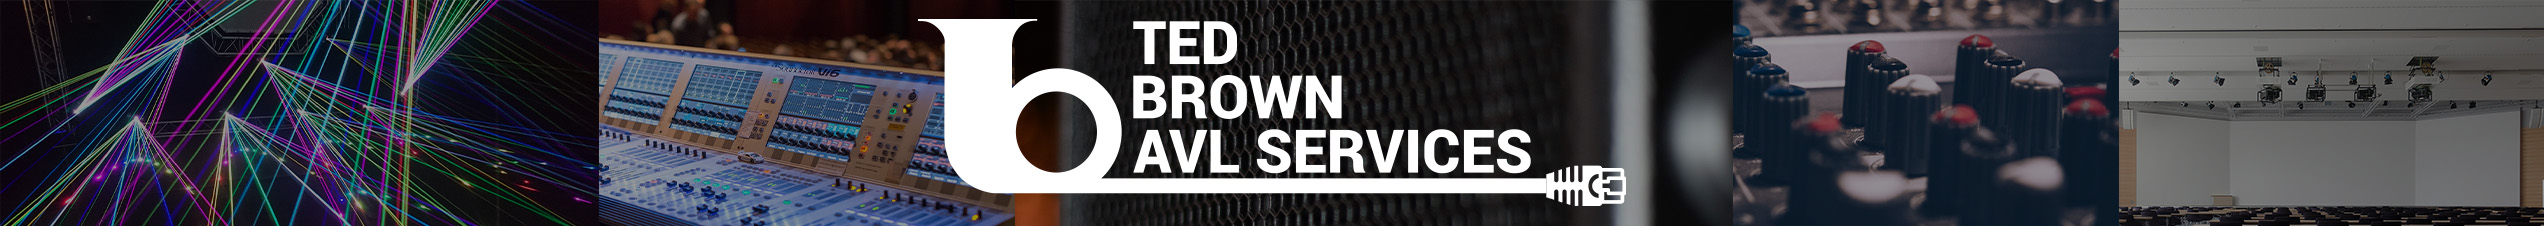 Ted Brown AVL Services